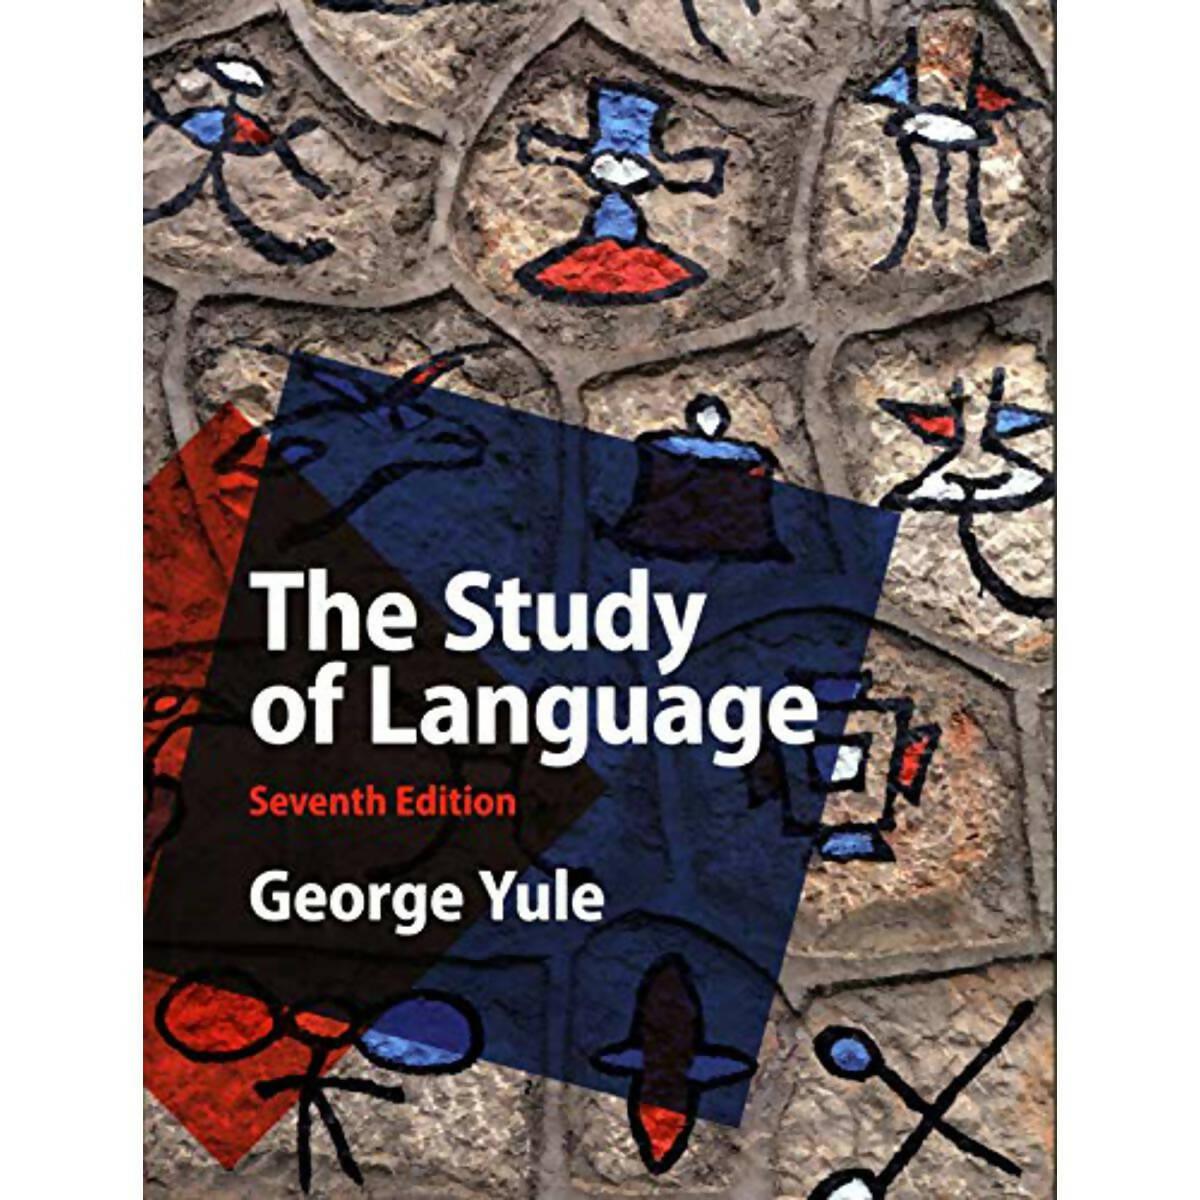 Language　Yule　low　of　George　–　ValueBox　price　Study　The　edition